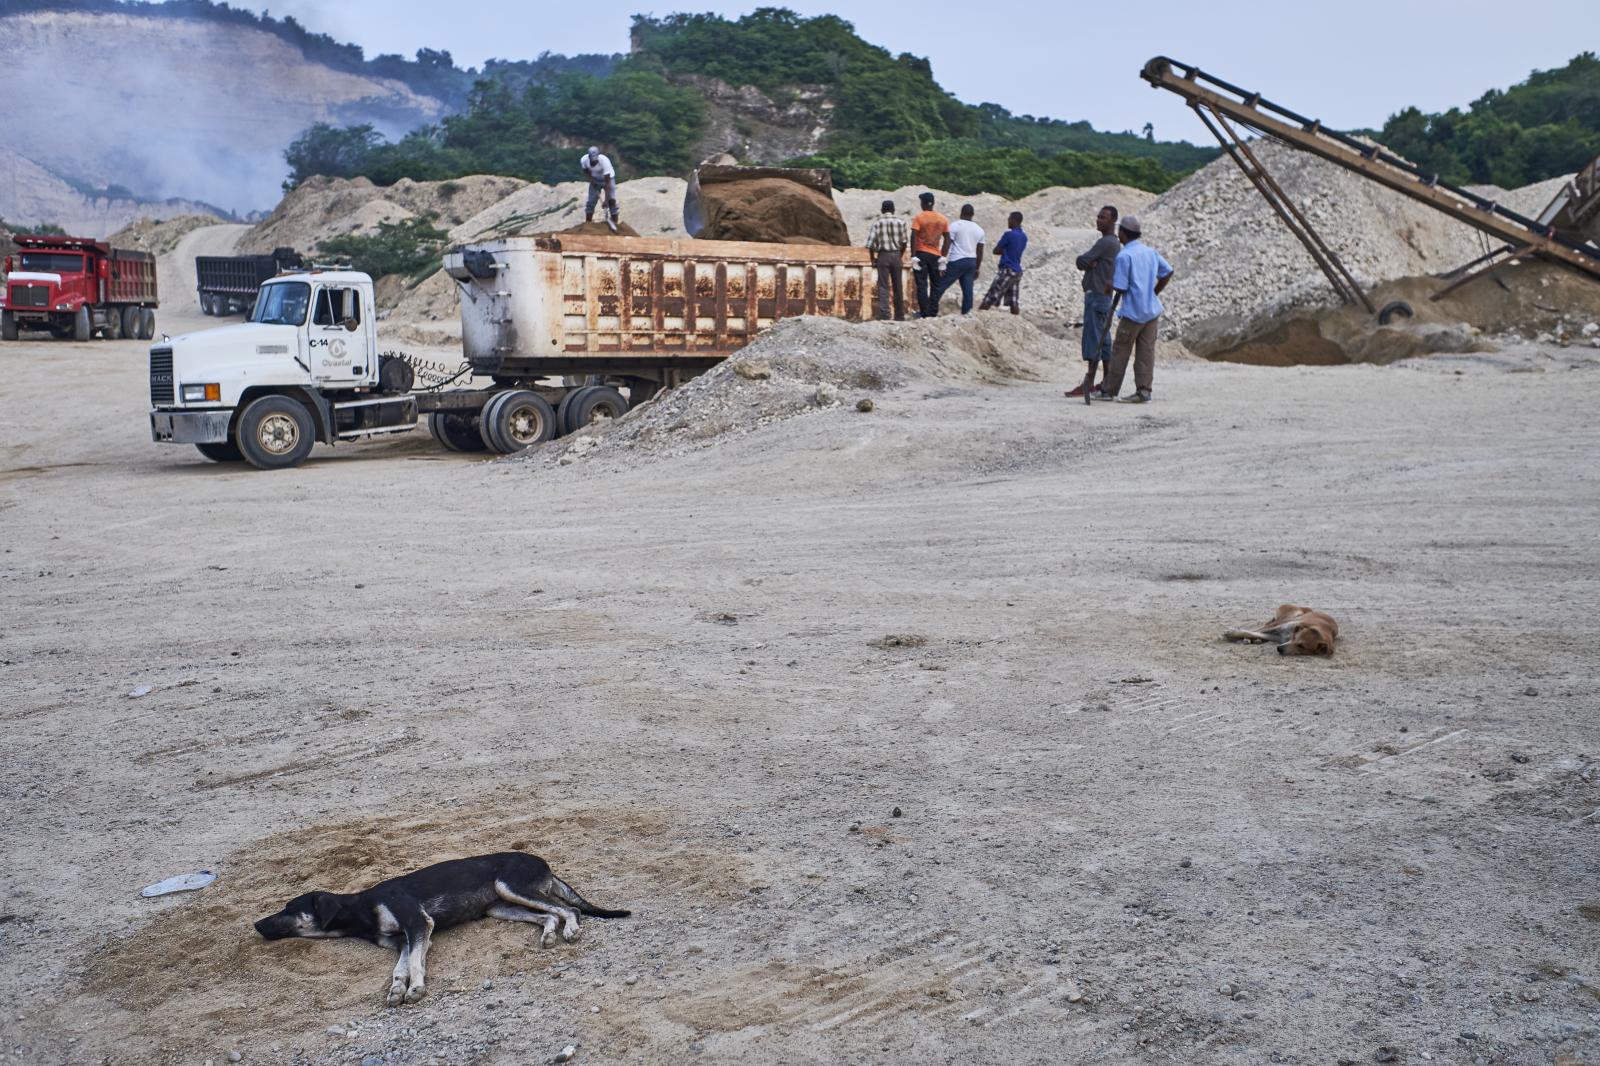 Sand, Diesel, and Sun: a day in a sand quarry in nigua, Dominican Republic